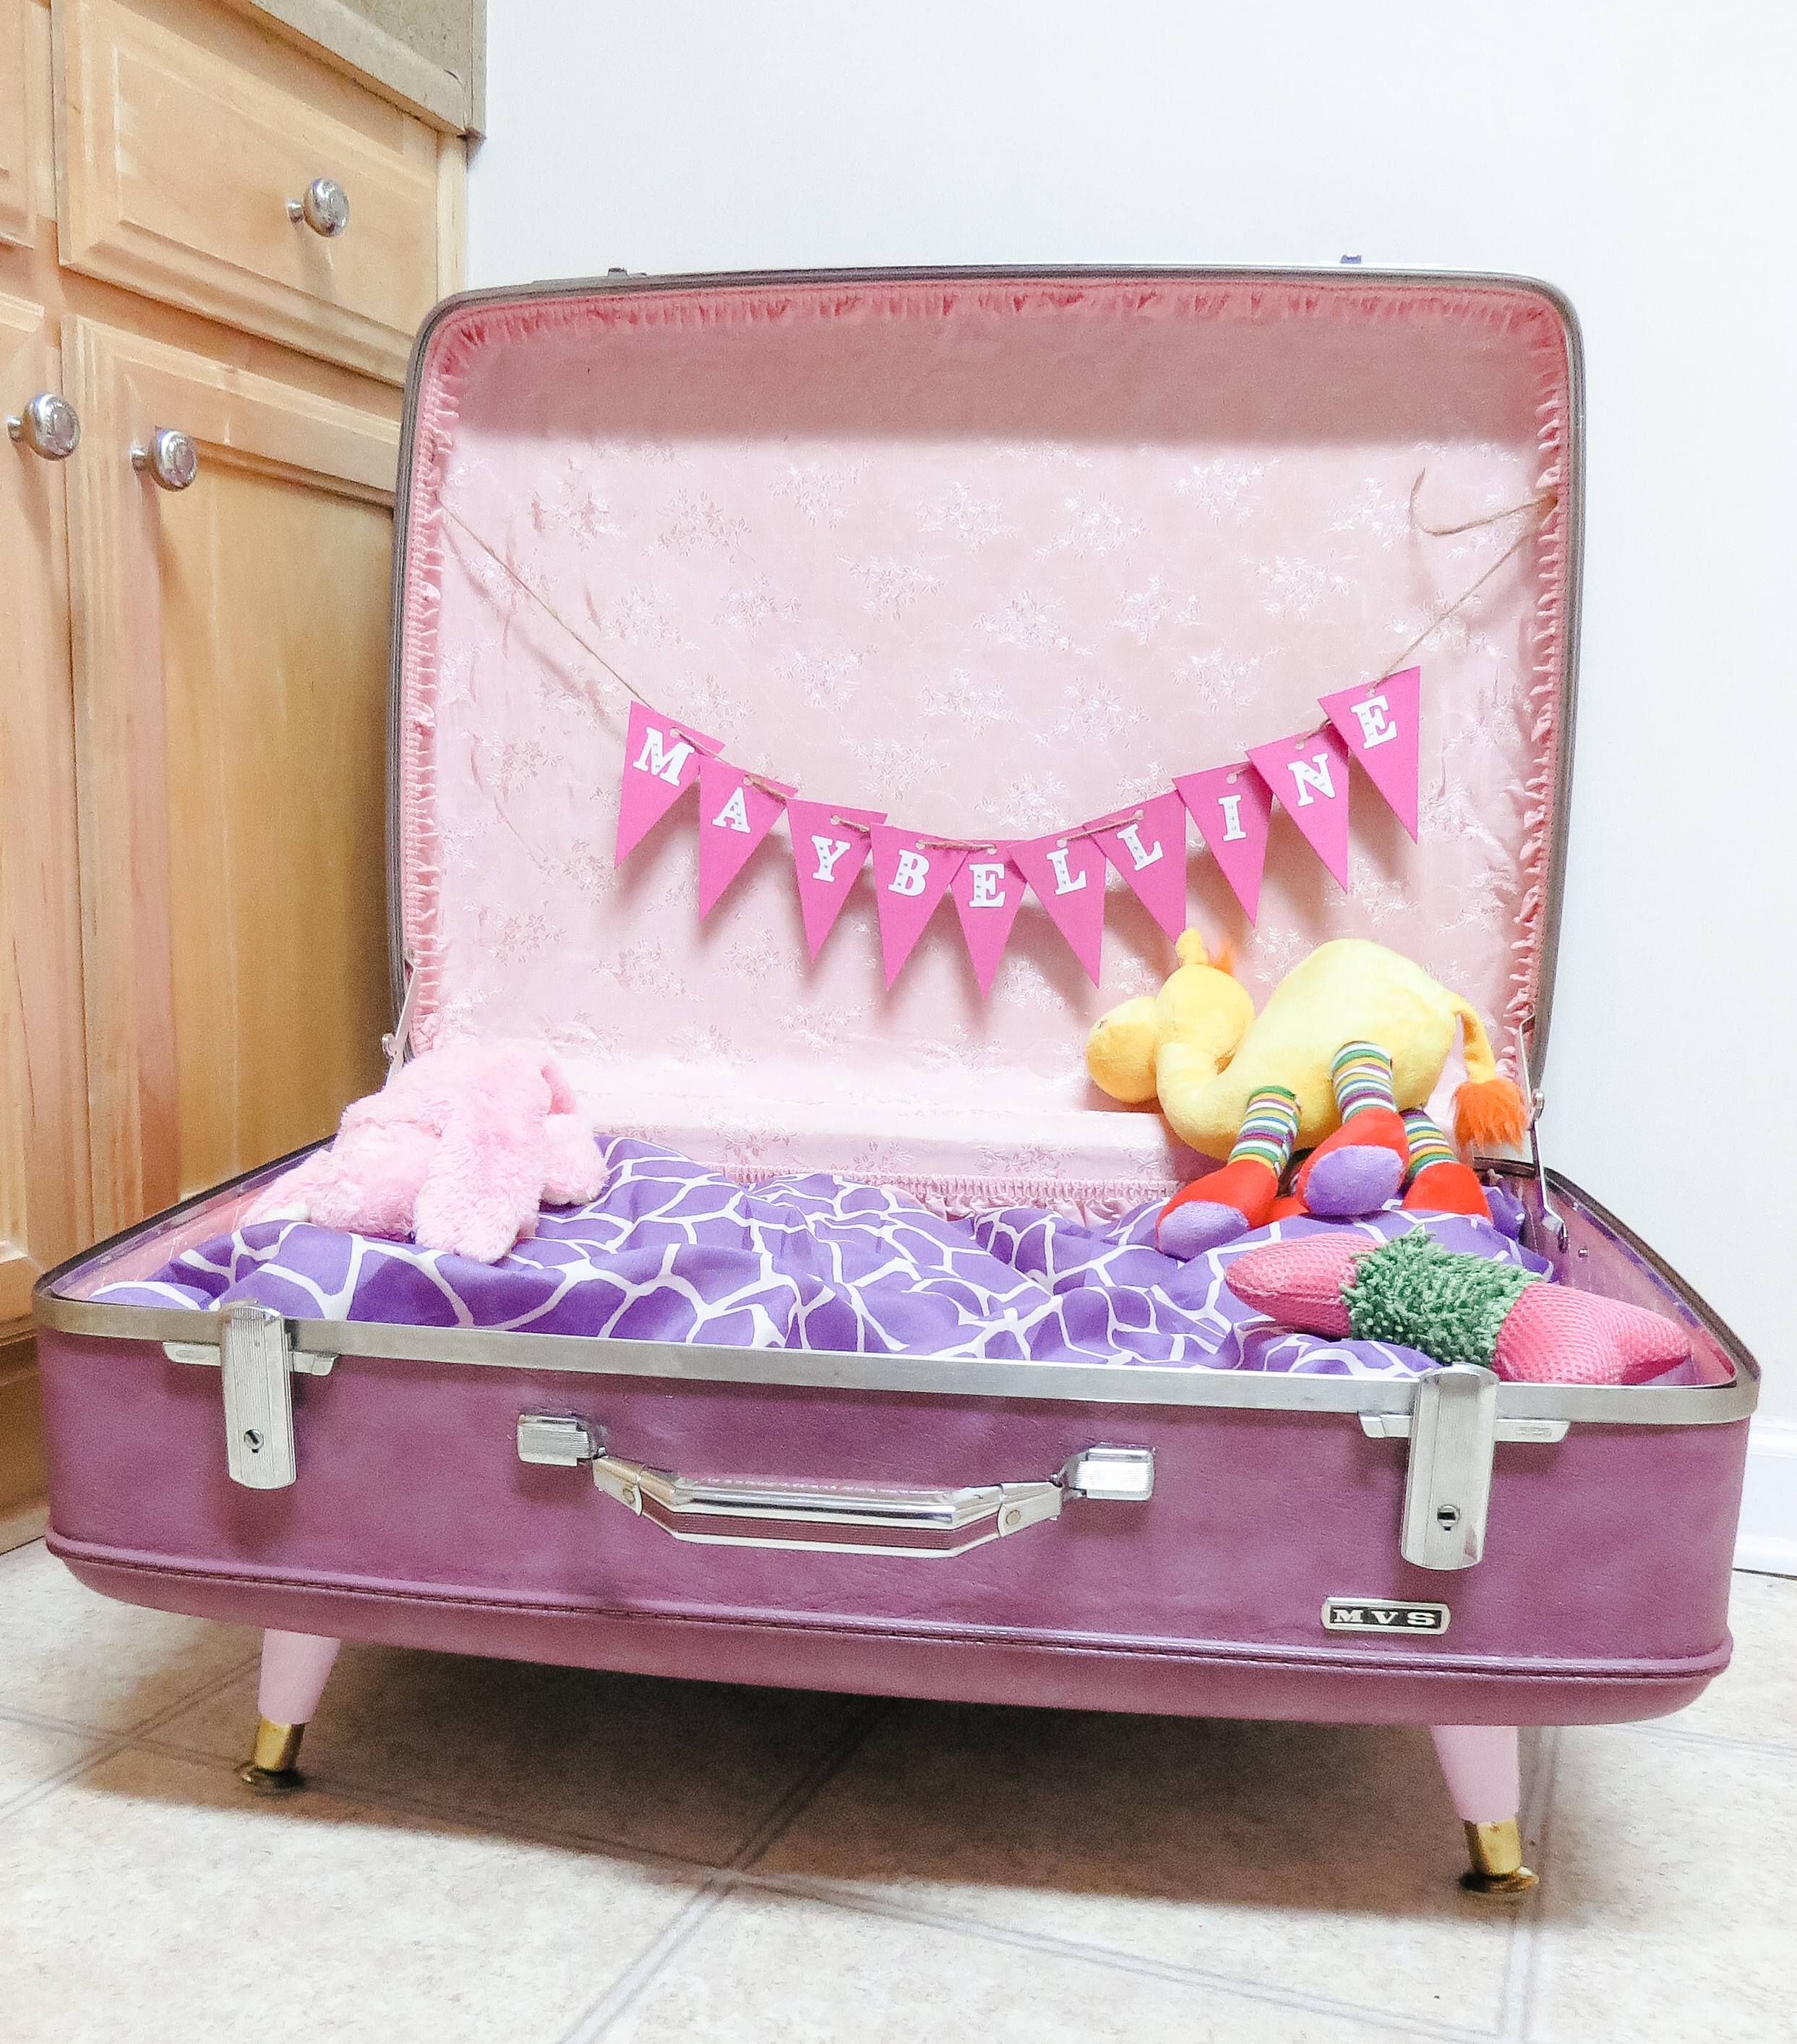 HOW TO MAKE A VINTAGE SUITCASE DOG BED